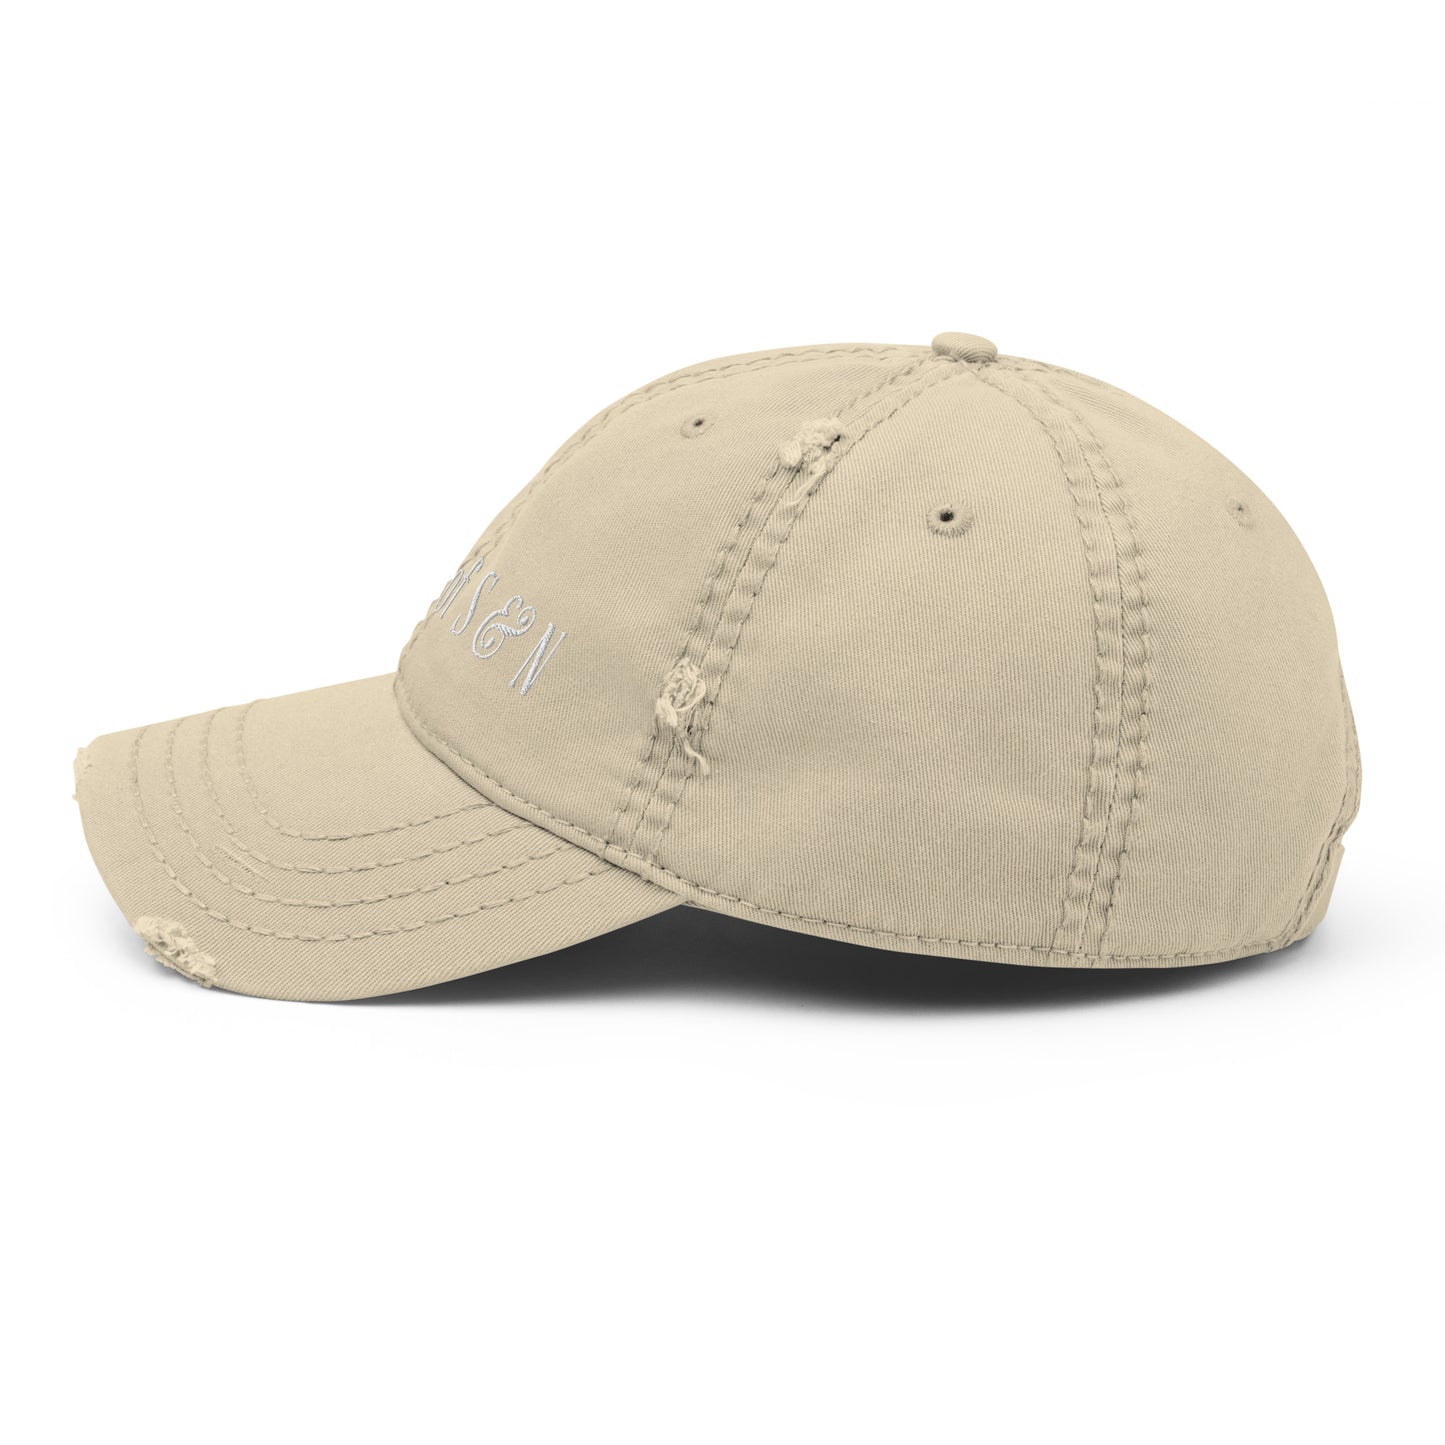 Distressed Dad Hat - House of S & N